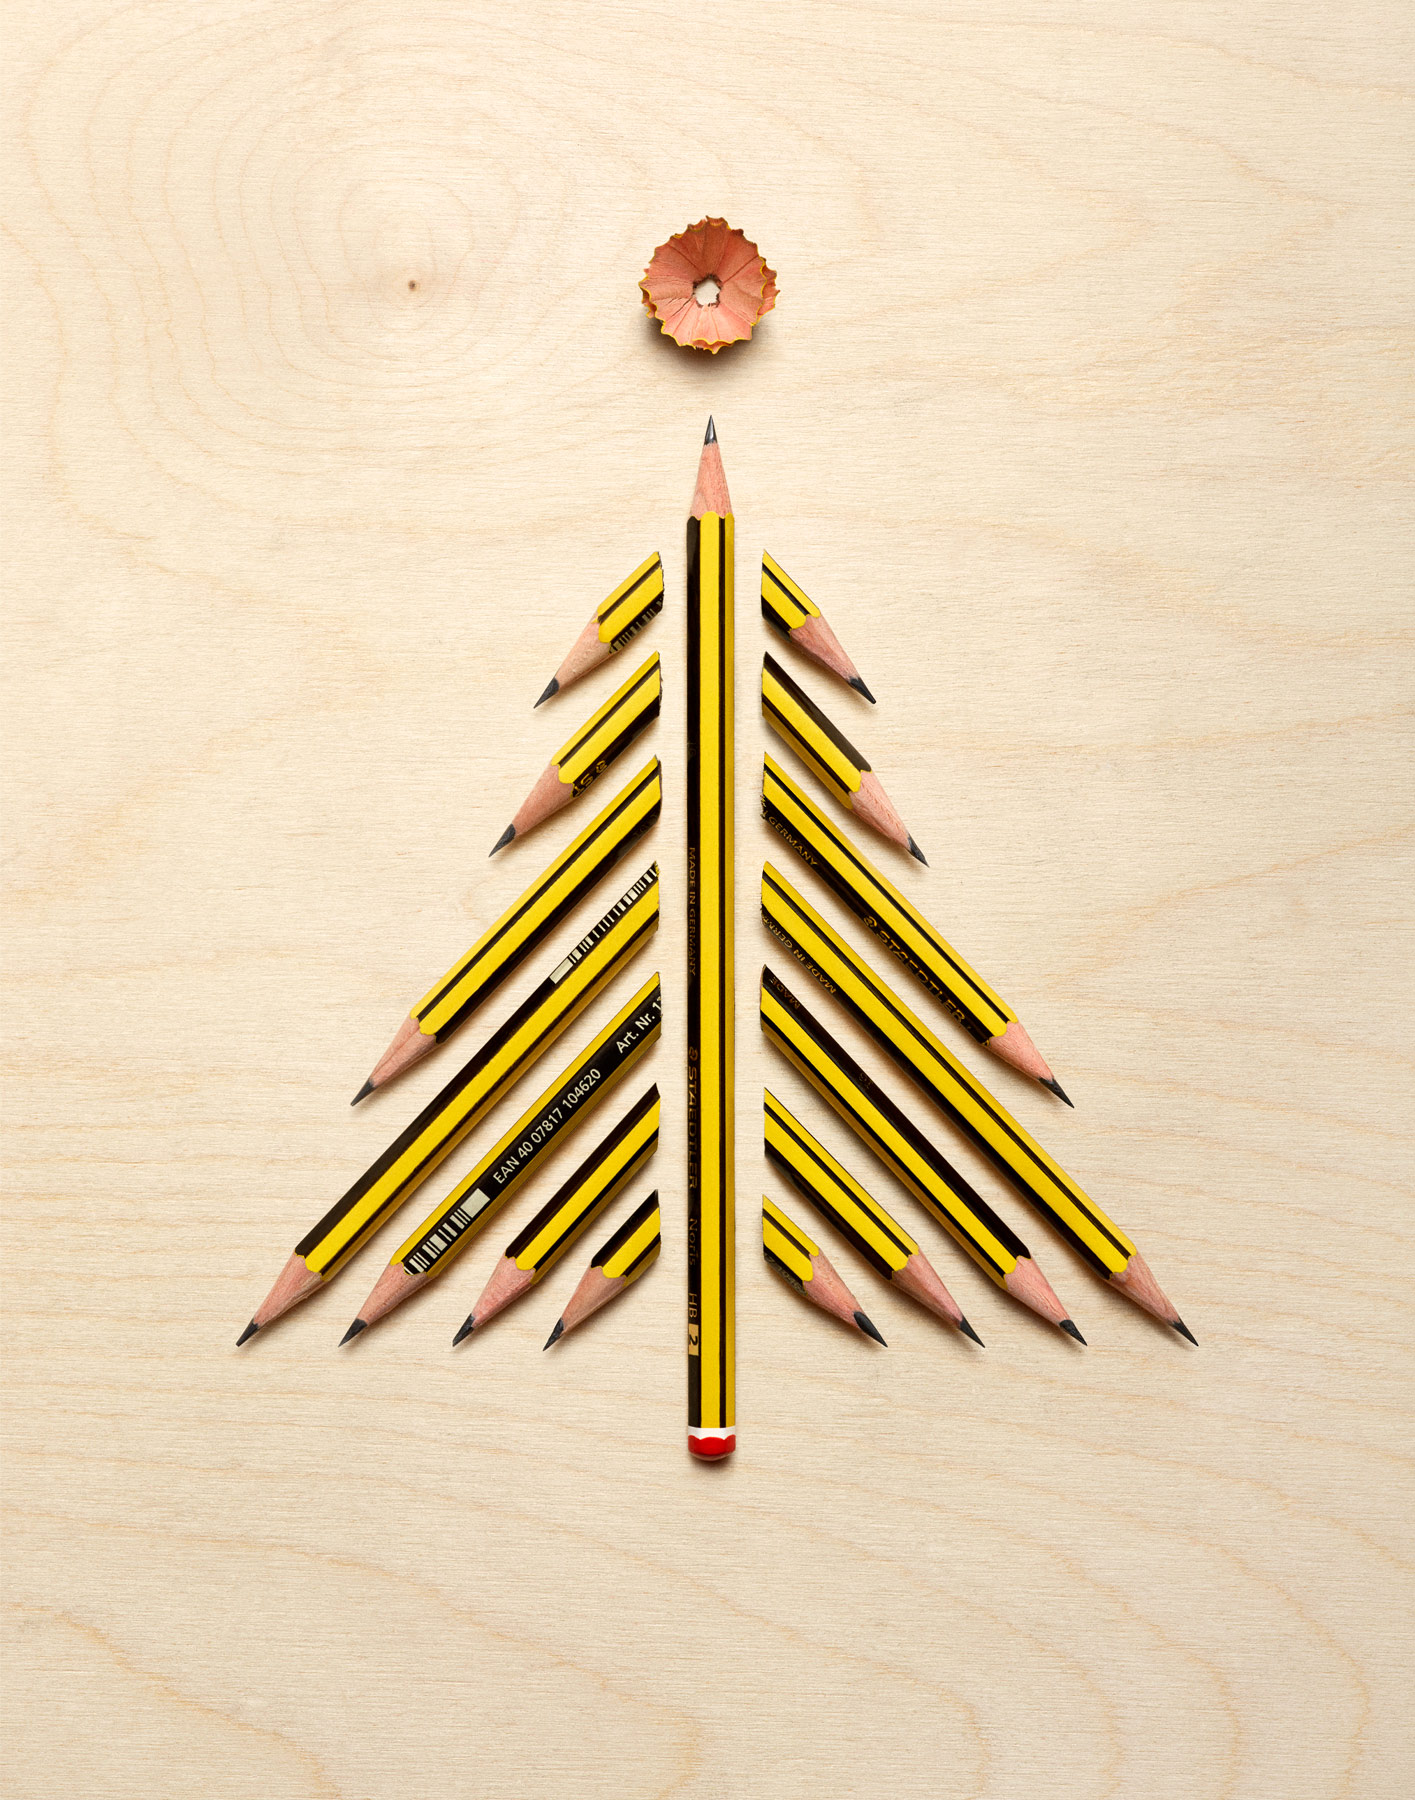 Staedtler pencils arranged like christmas tree by Alexander Kent London based still life and product photographer.